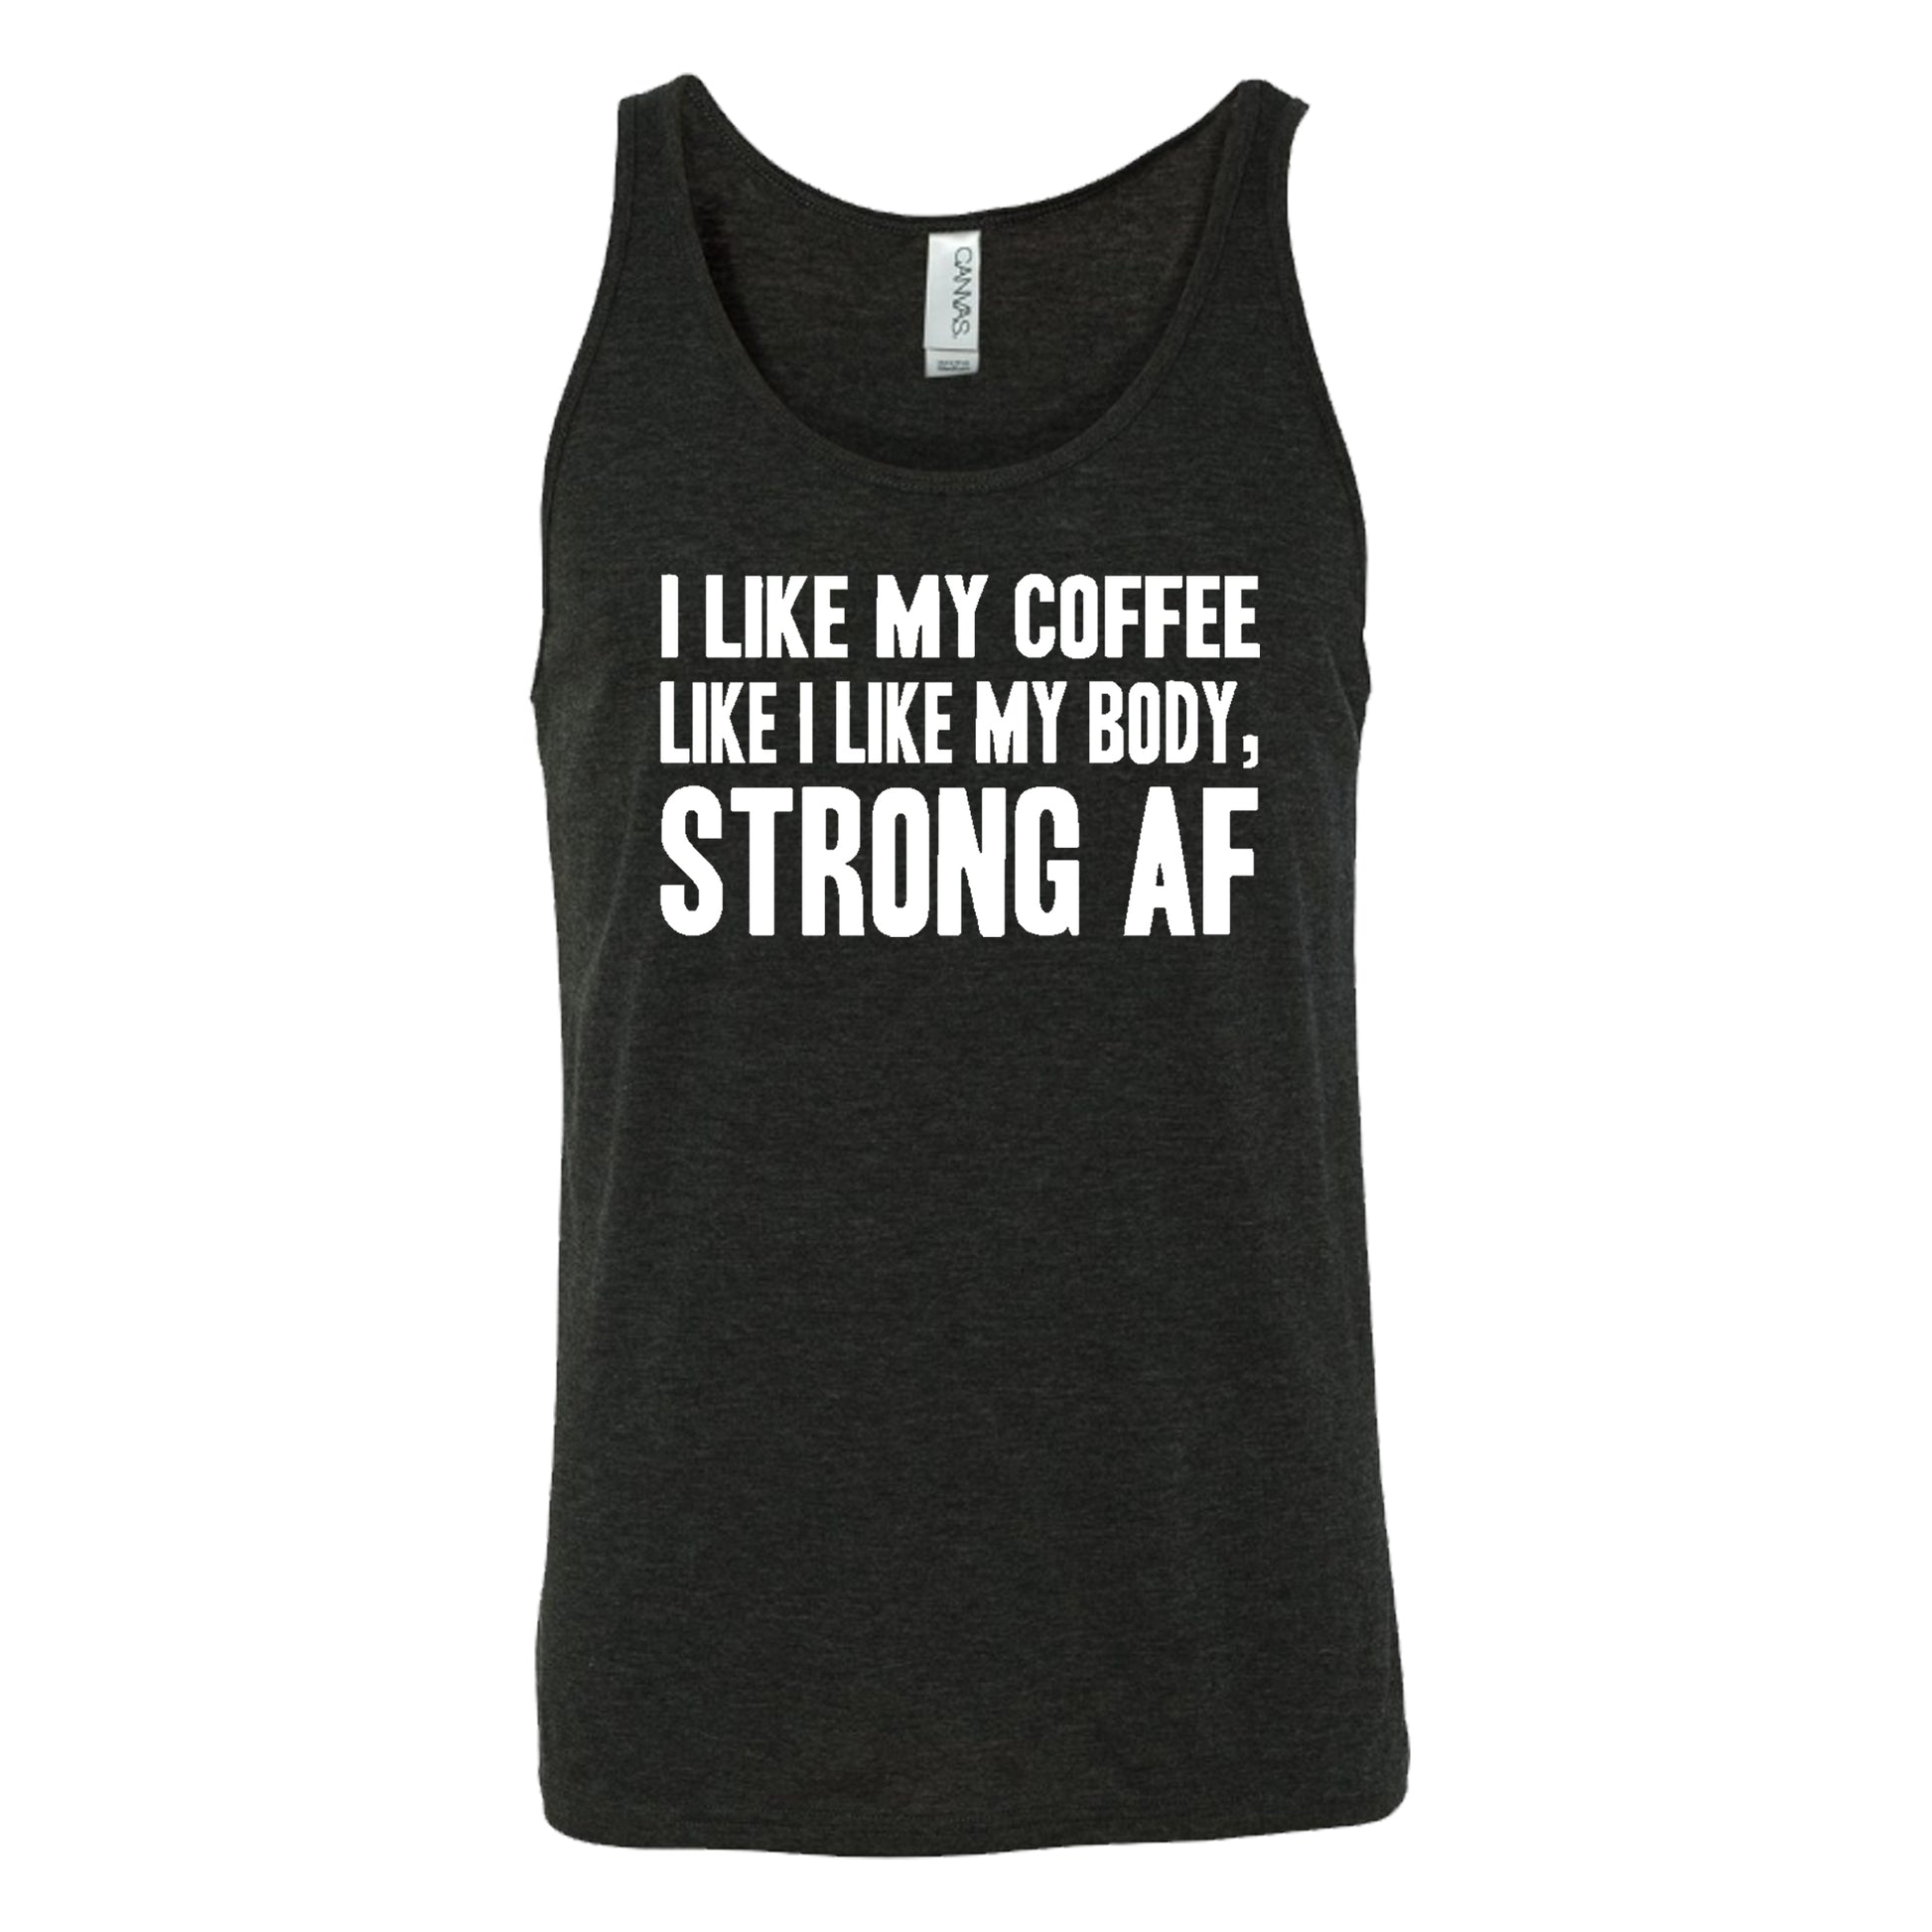 "I Like My Coffee Like I Like My Body Strong AF" quote in white lettering on black tank